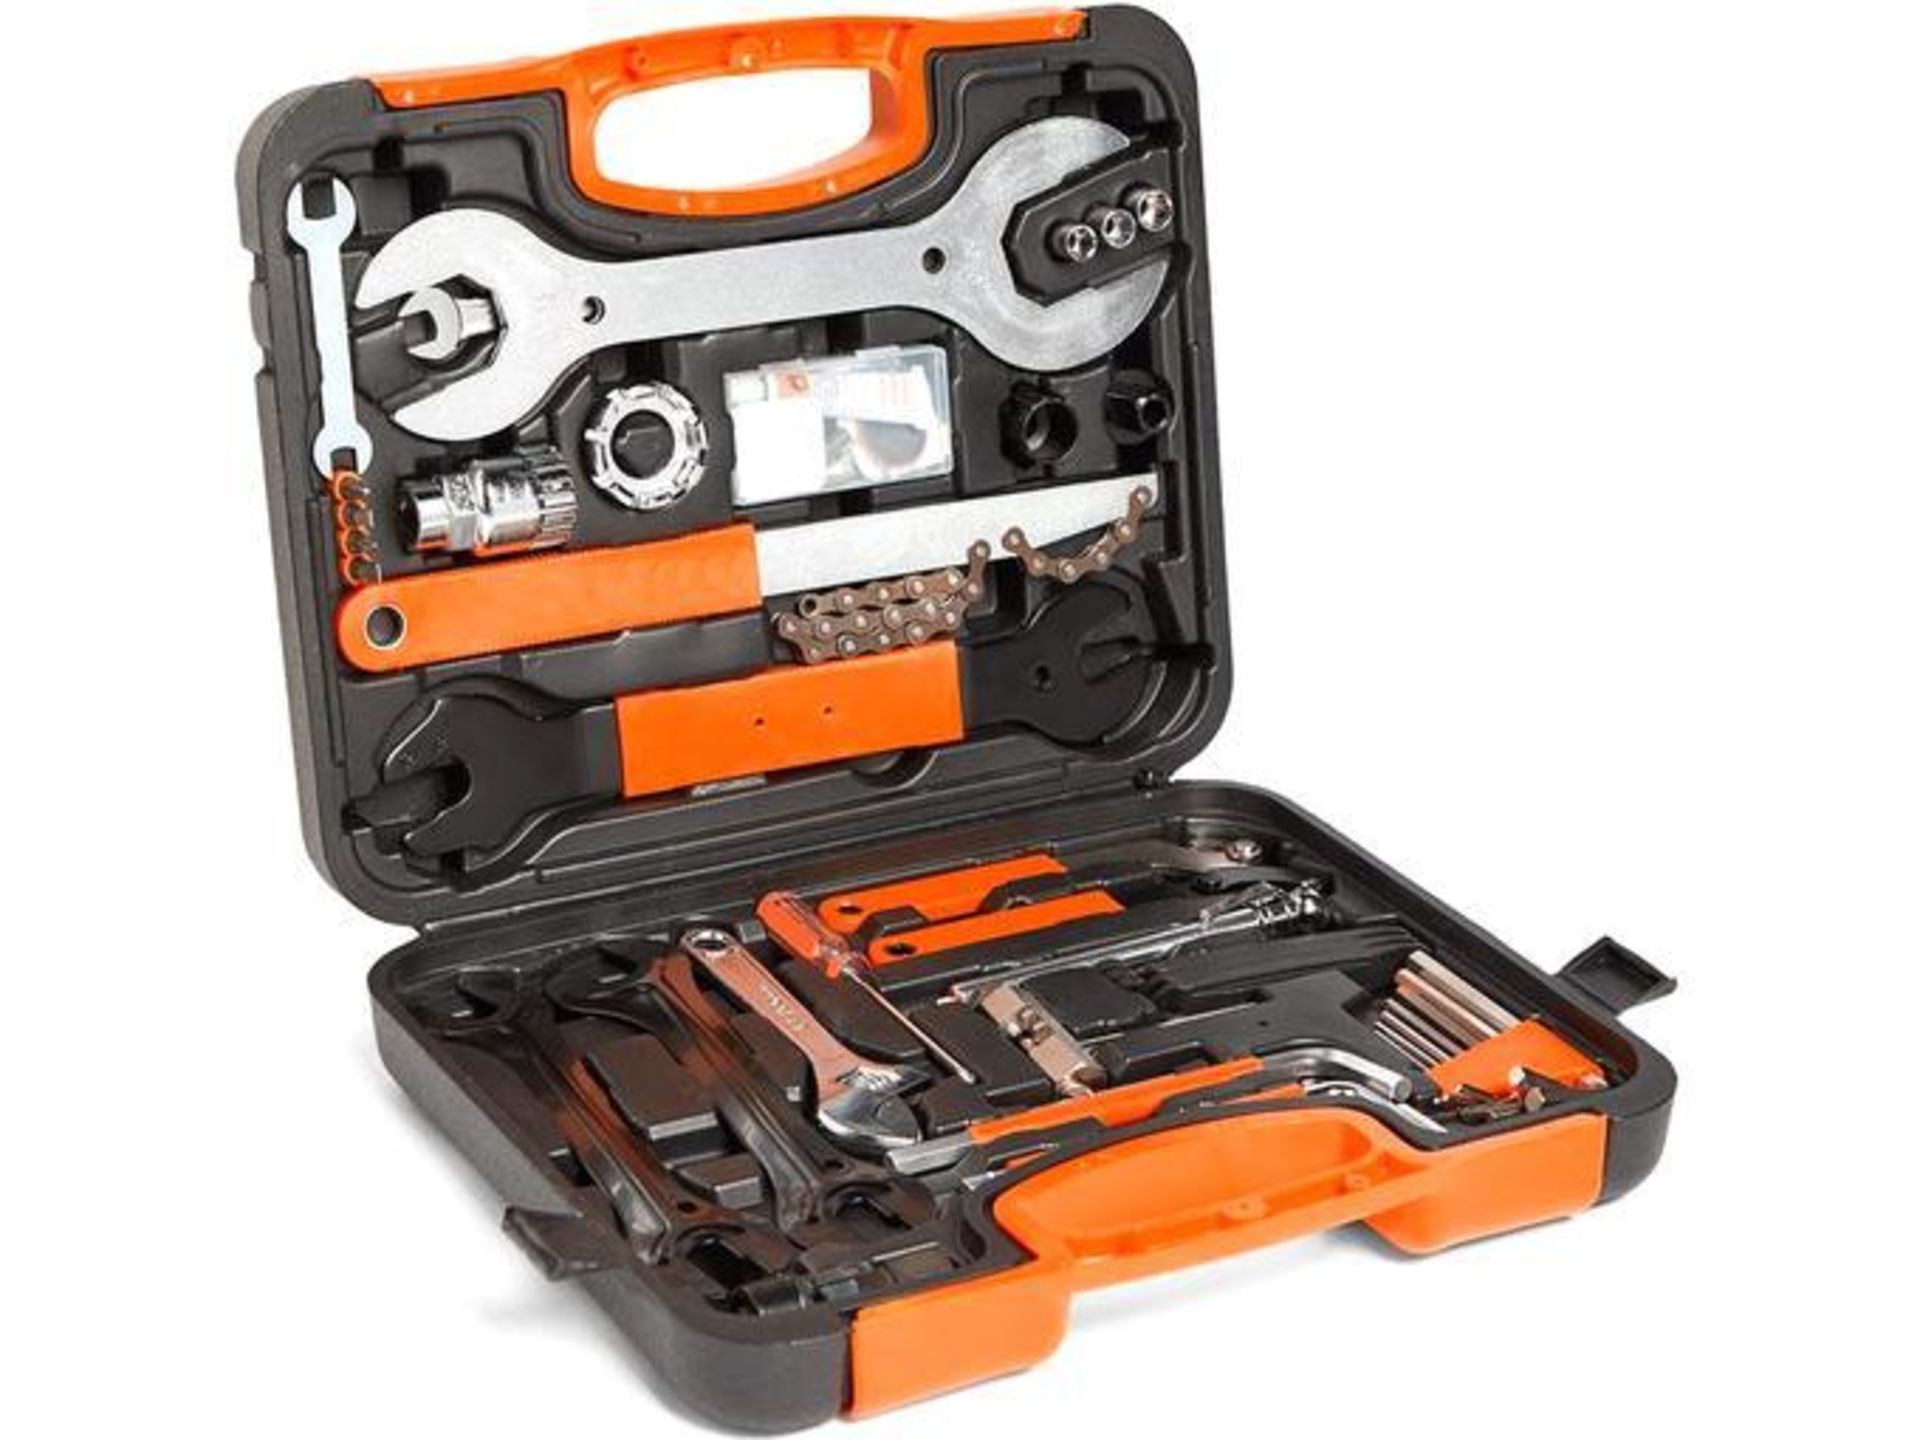 Luxury 35 Piece Bicycle Hand Tool Set (ER51) Bicycle maintenance tool kit. Be prepared for any